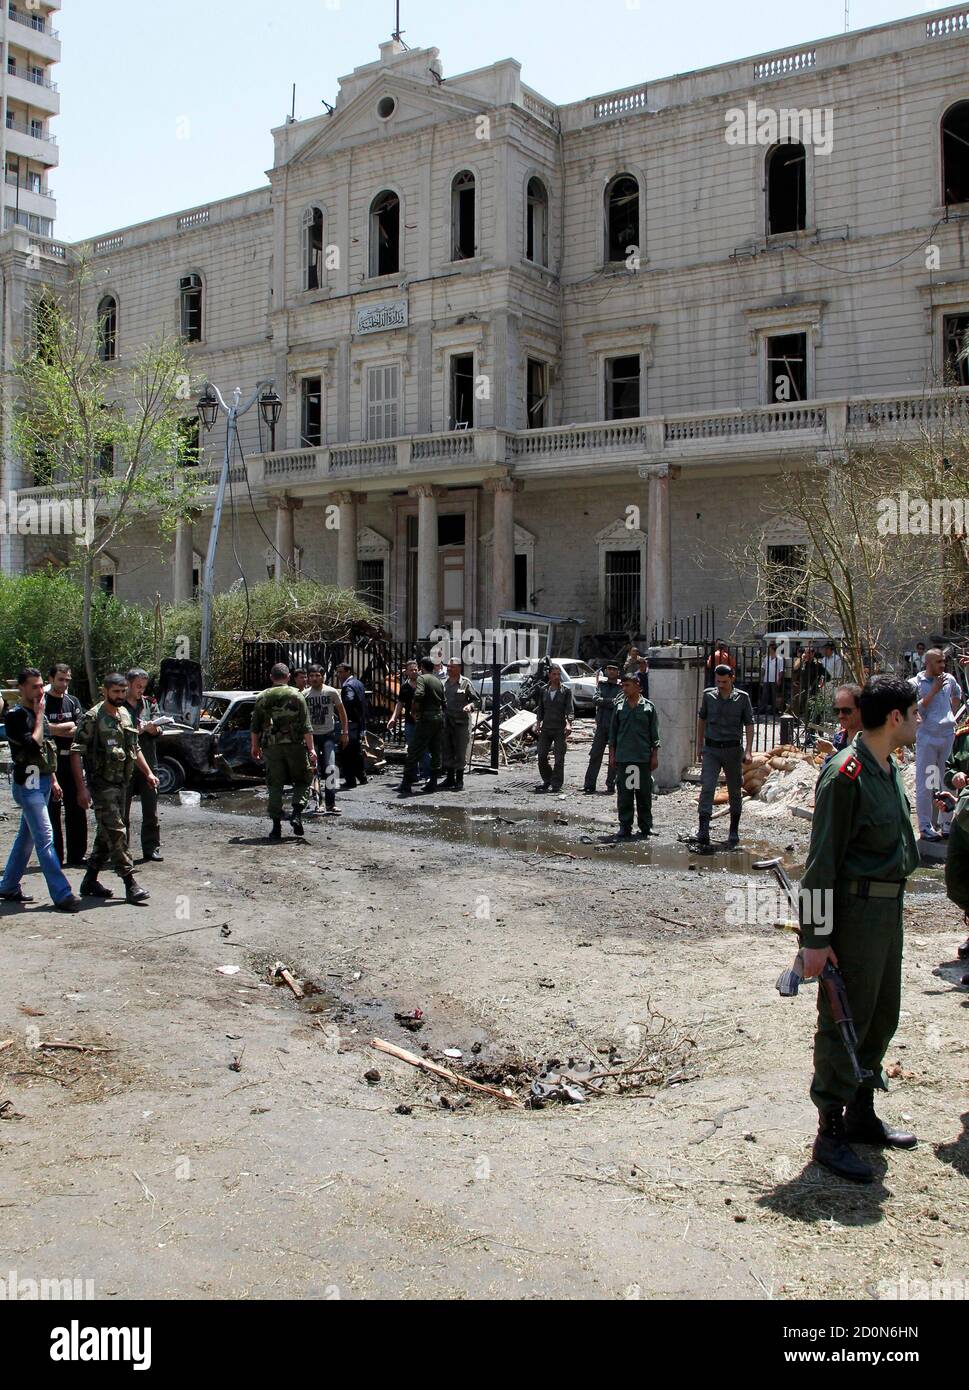 Security personnel walk near the former Interior Ministry building after a blast at Marjeh Square in Damascus April 30, 2013. The bomb in central Damascus killed 13 people on Tuesday, state television said, a day after Prime Minister Wael al-Halki survived an attack on his convoy in the heart of the Syrian capital. State television said 70 people were wounded, several critically. The British-based Syrian Observatory reported 9 dead civilians and 3 security men and said the death toll was likely to rise. REUTERS/Khaled al-Hariri (SYRIA - Tags: POLITICS CONFLICT) Stock Photo